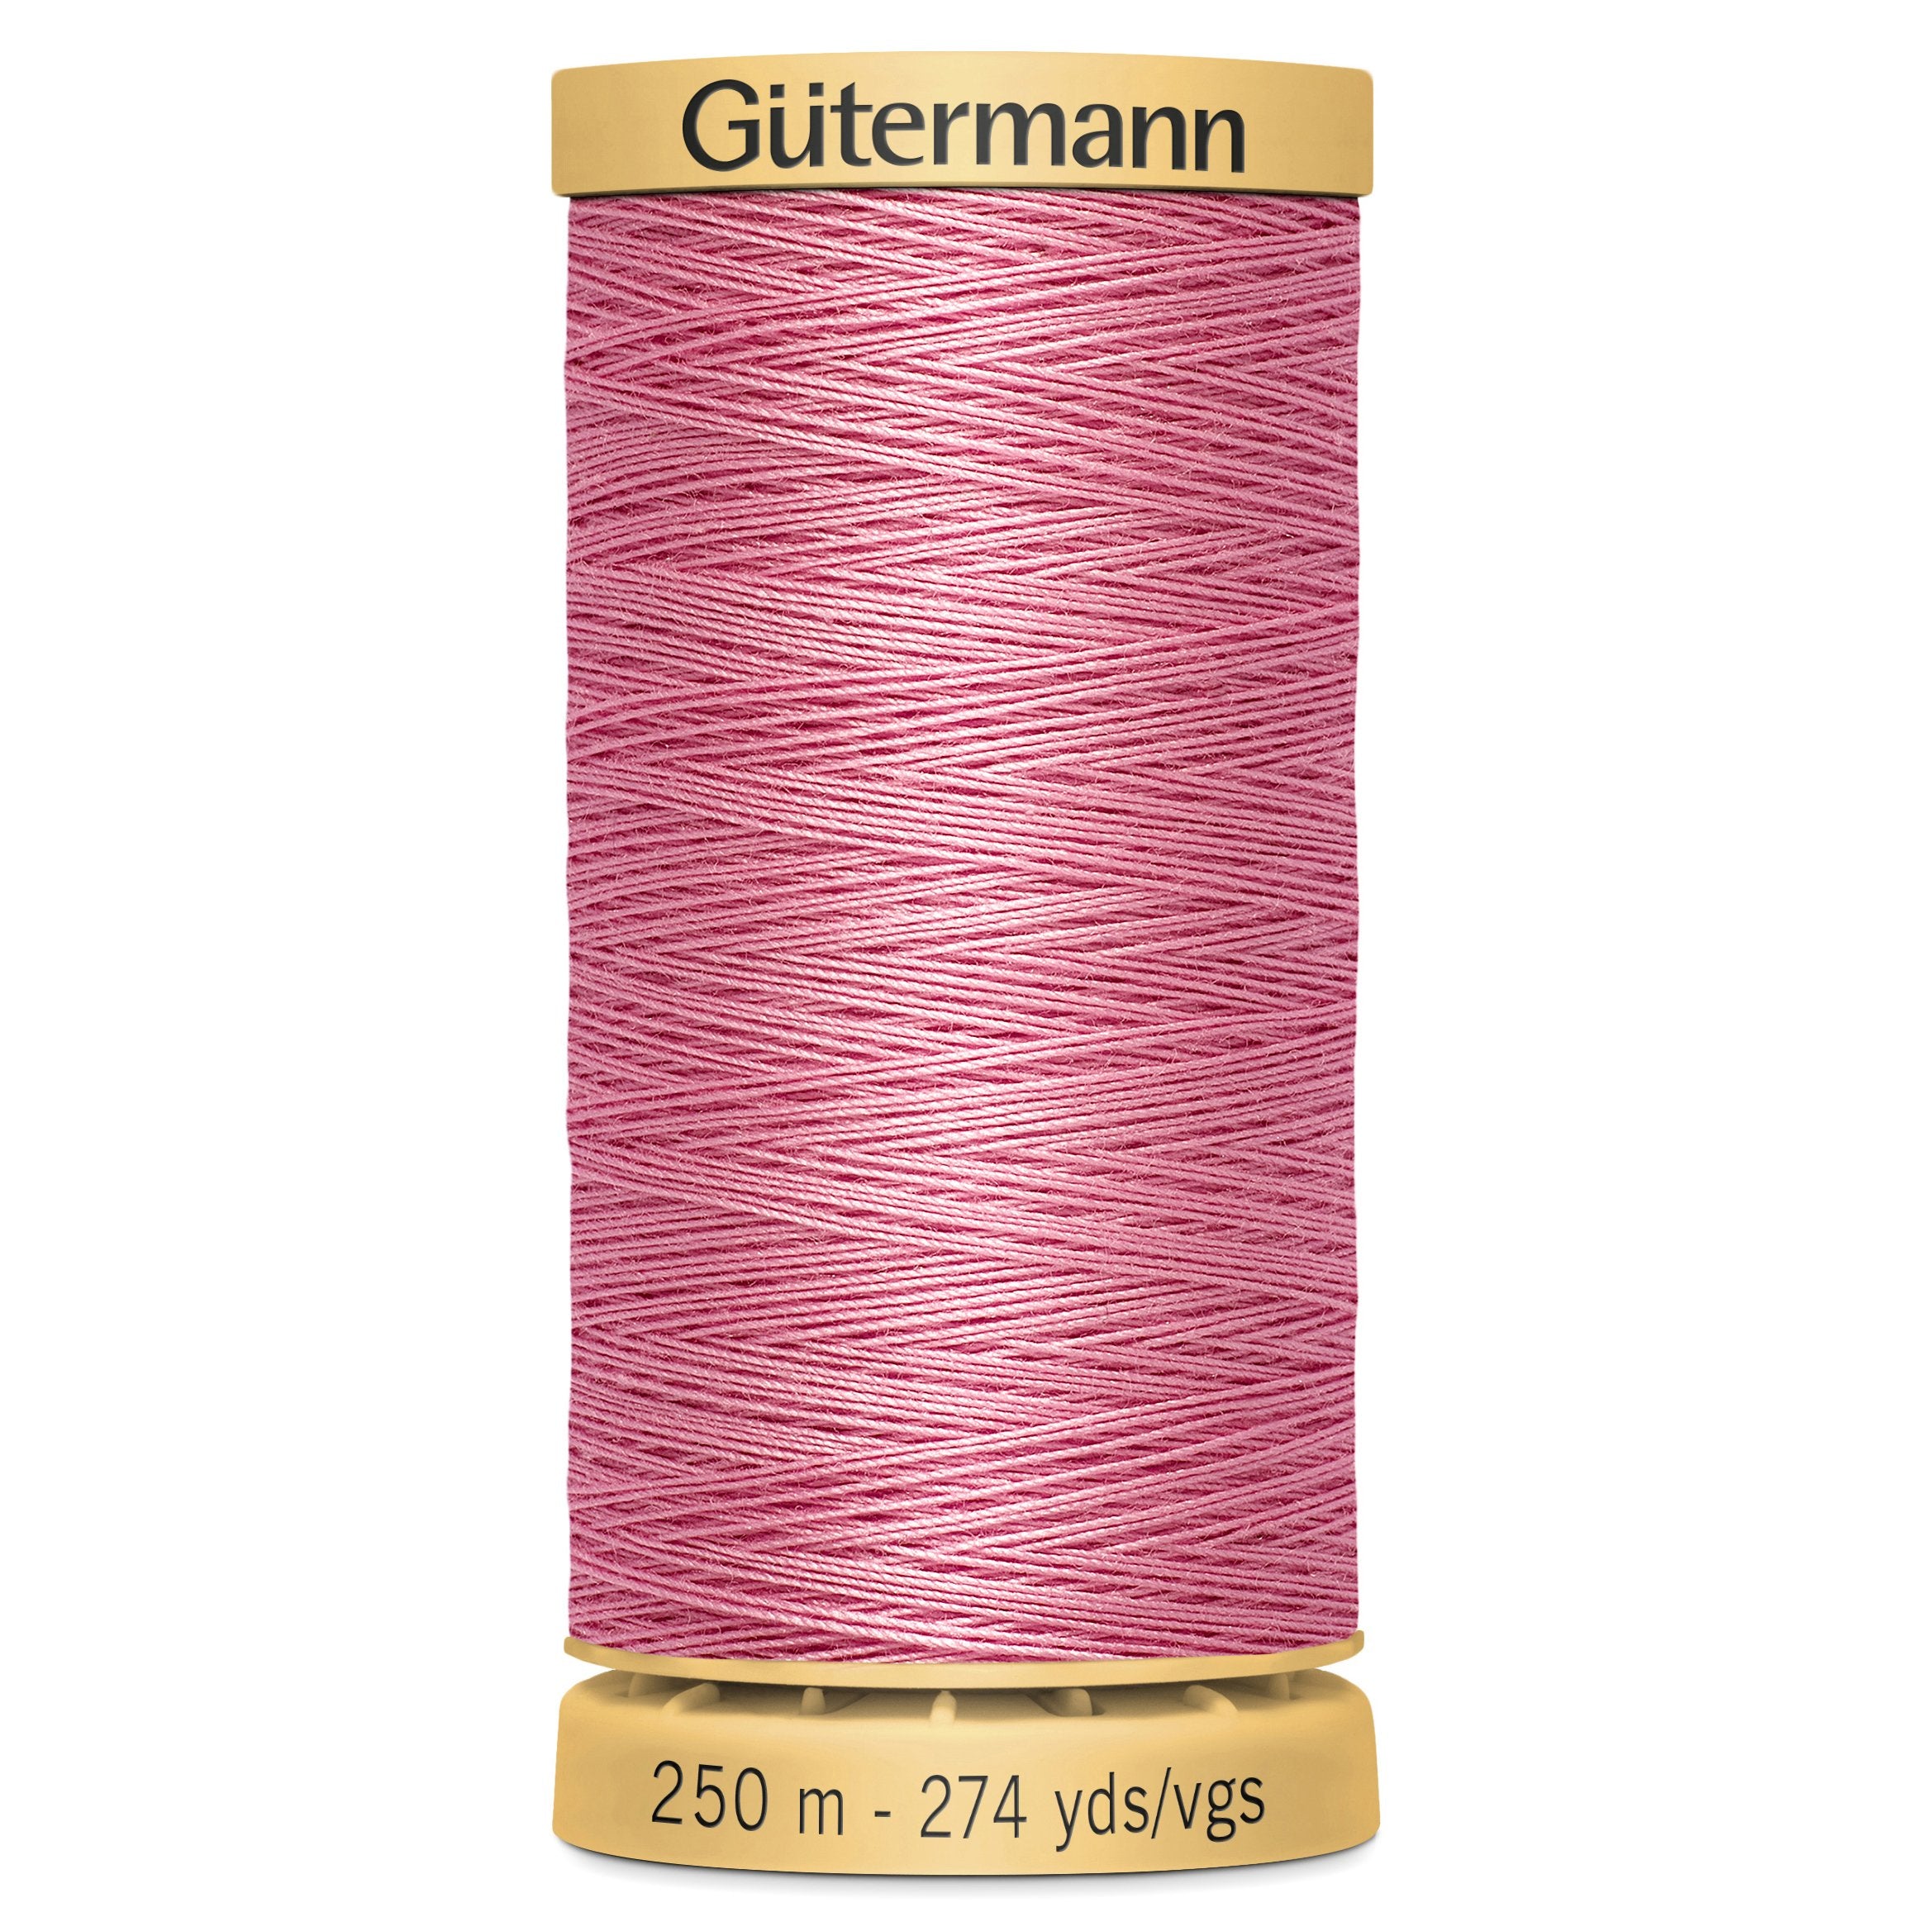 Gutermann Natural Cotton, 5110 Pink from Jaycotts Sewing Supplies